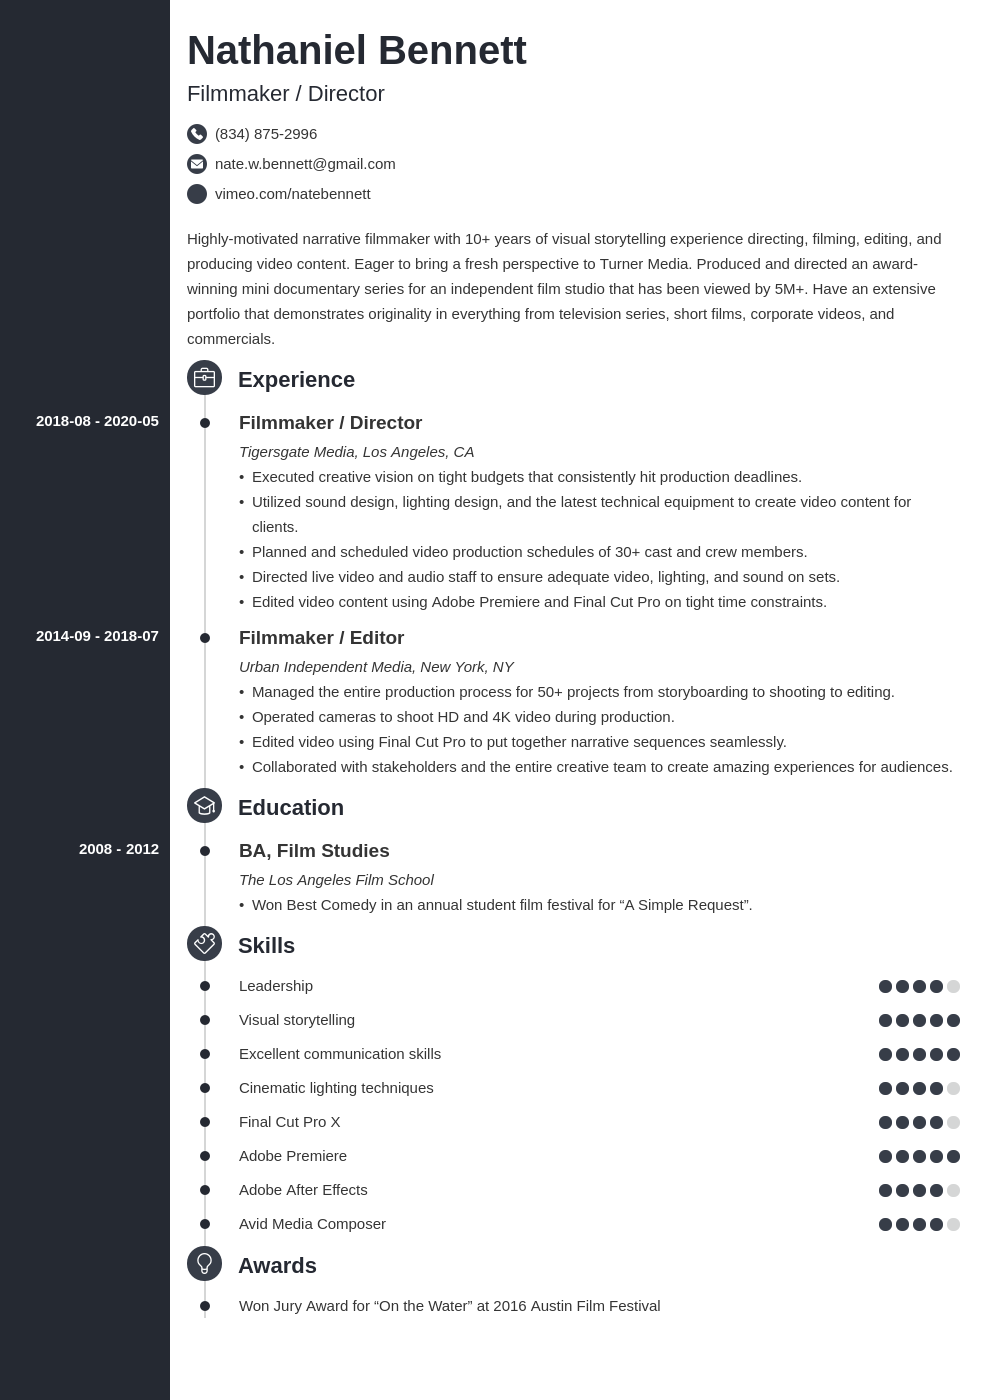 Filmmaker Resume: Examples and Guide for a Filmmaking CV